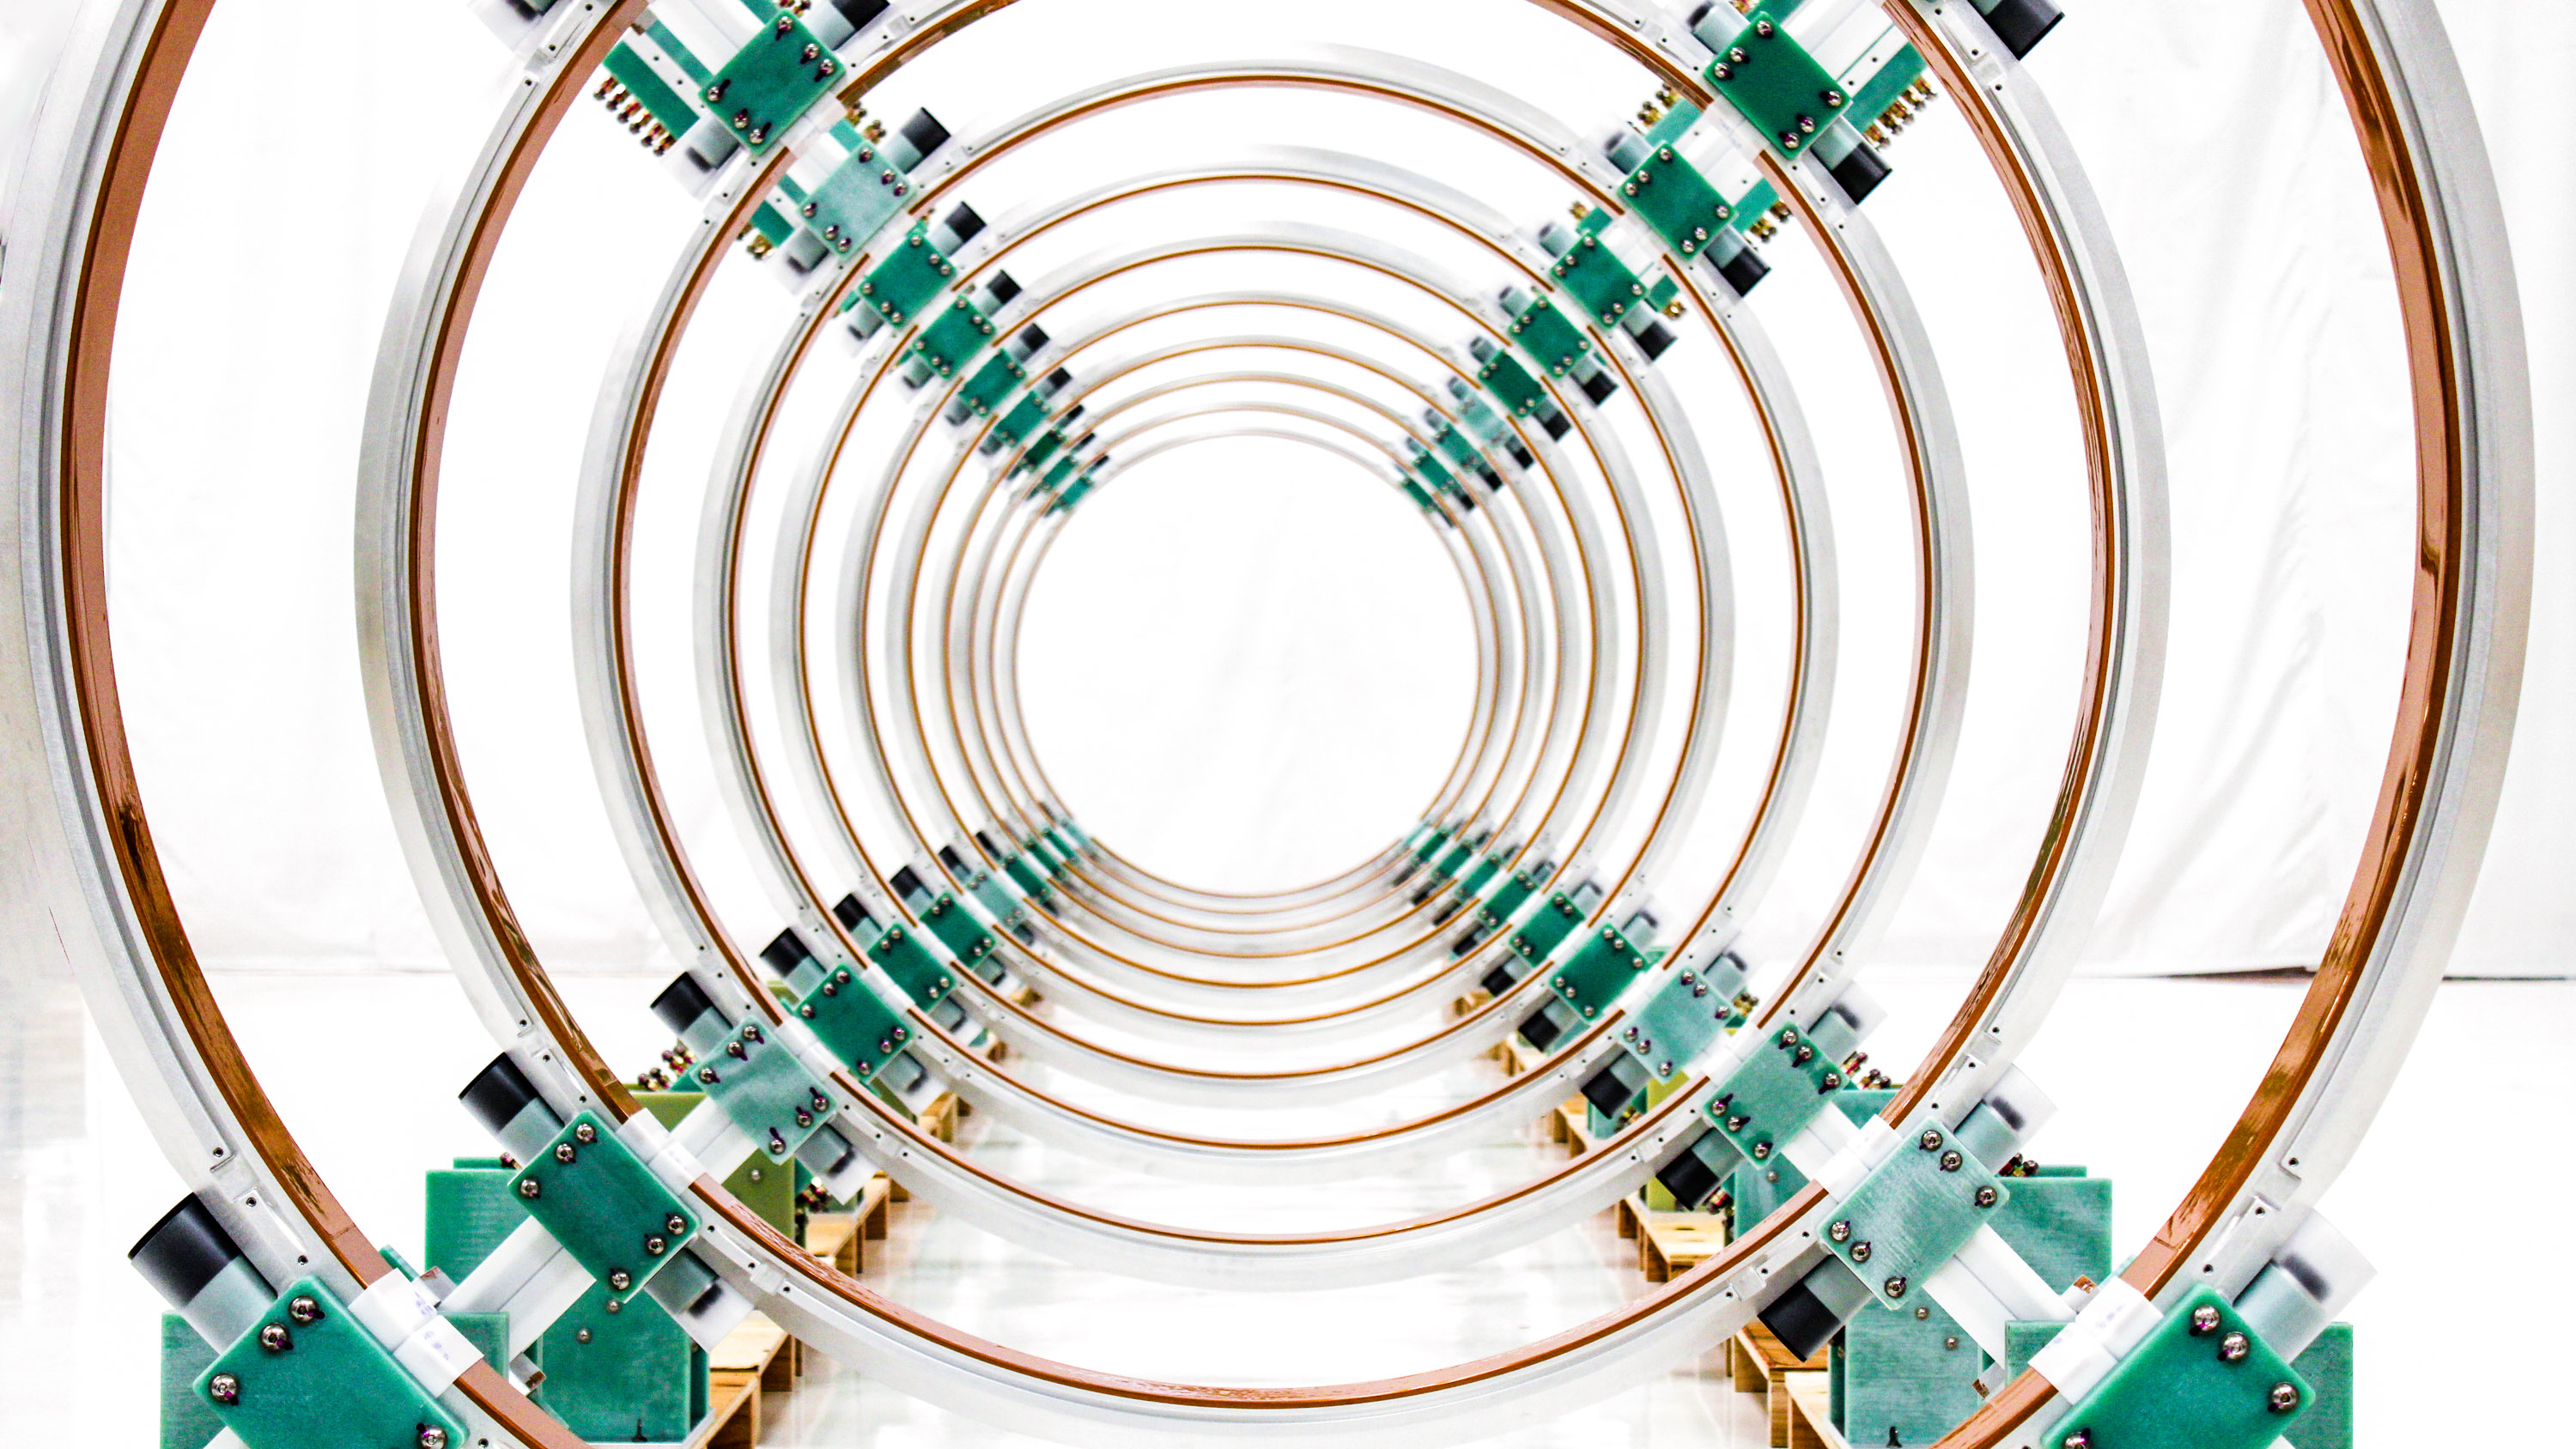 a view inside the electromagnetic coil of the Polaris reactor